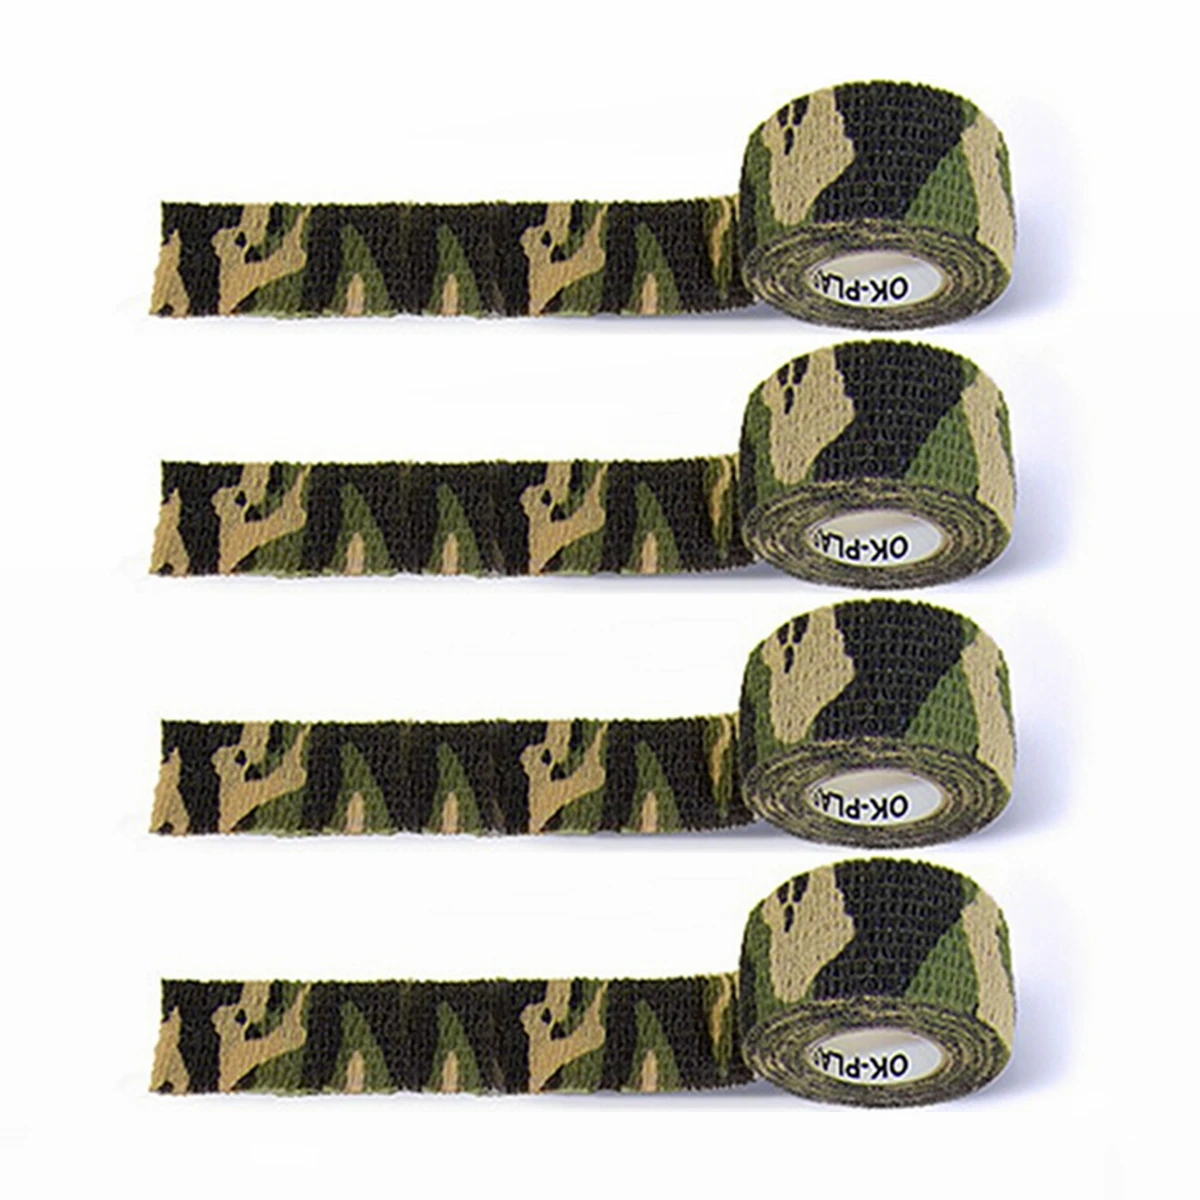 Details about   4.5m Self-Adhesive Camouflage Stretch Medical Bandage Non-Woven Protective Tape 